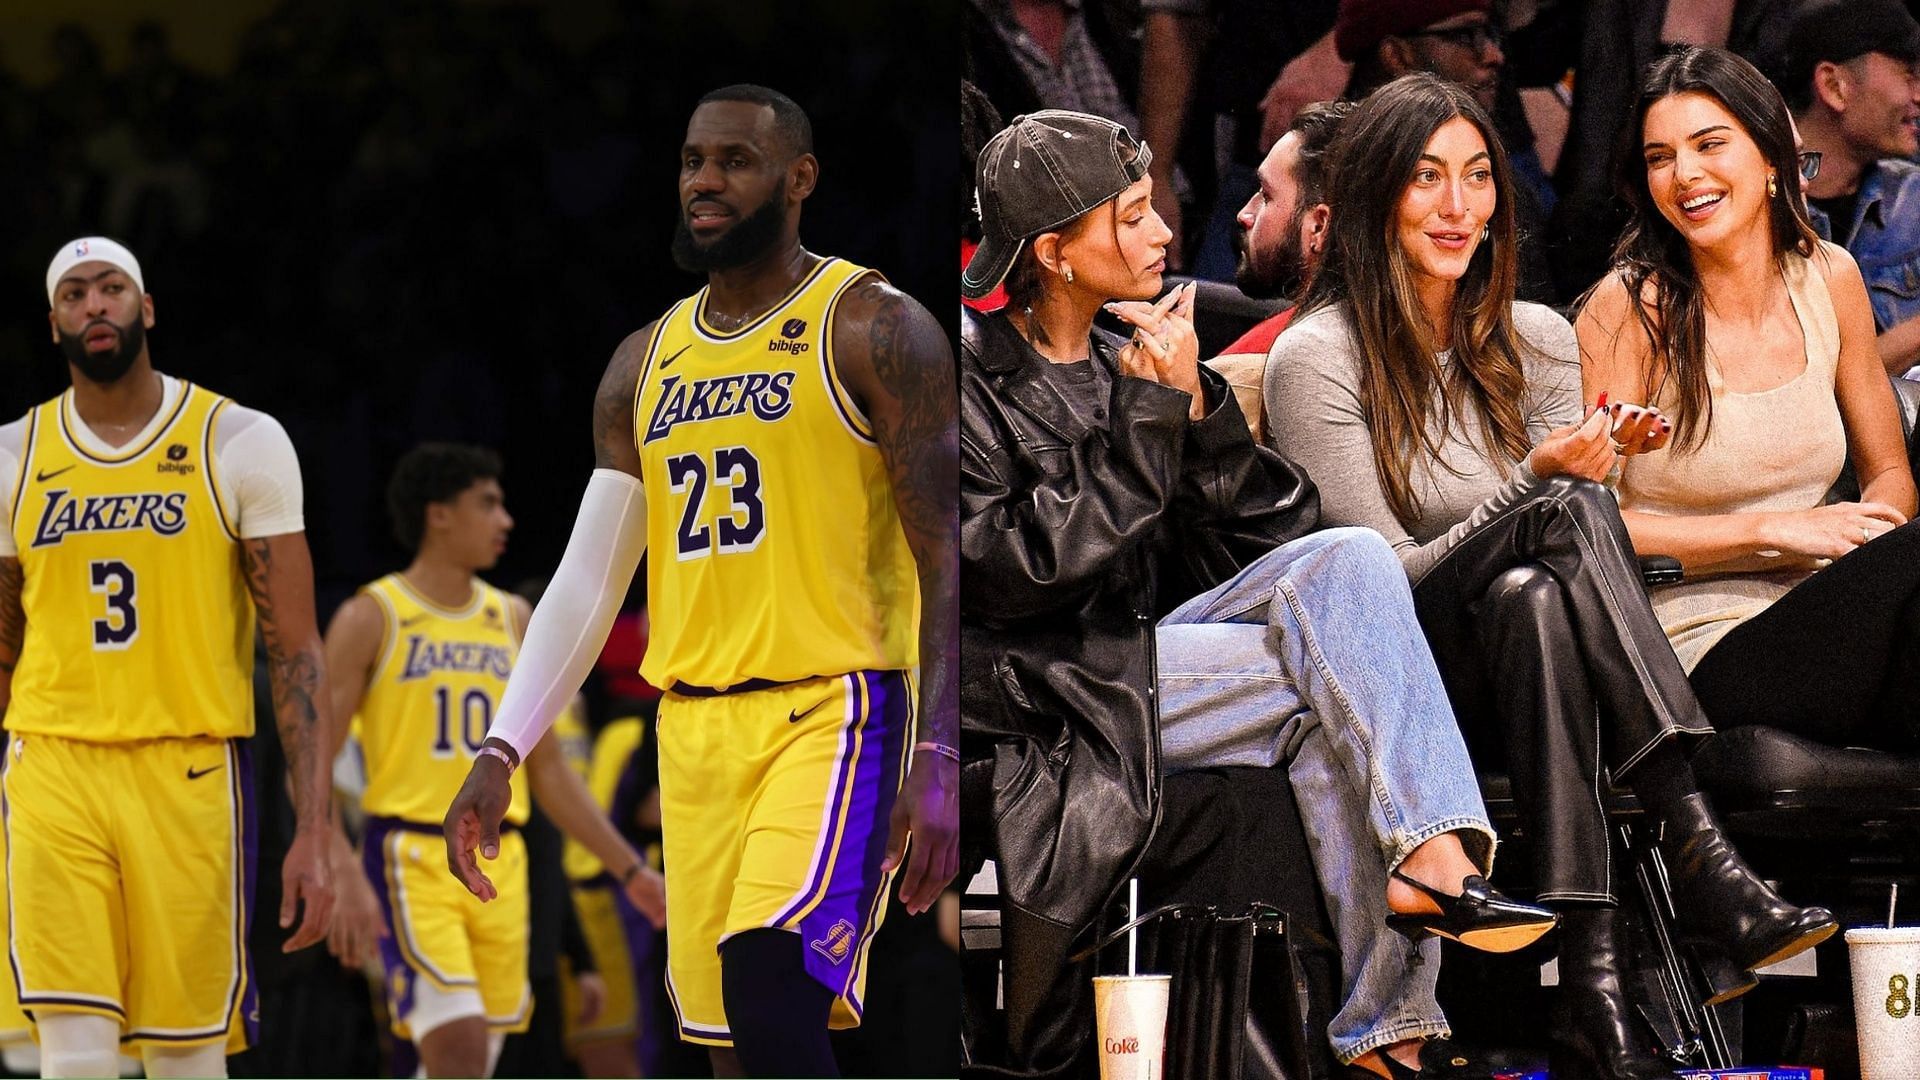 Hailey Bieber, Kendall Jenner, and Sarah Staudinger in attendance at the LA Lakers-OKC Thunder matchup